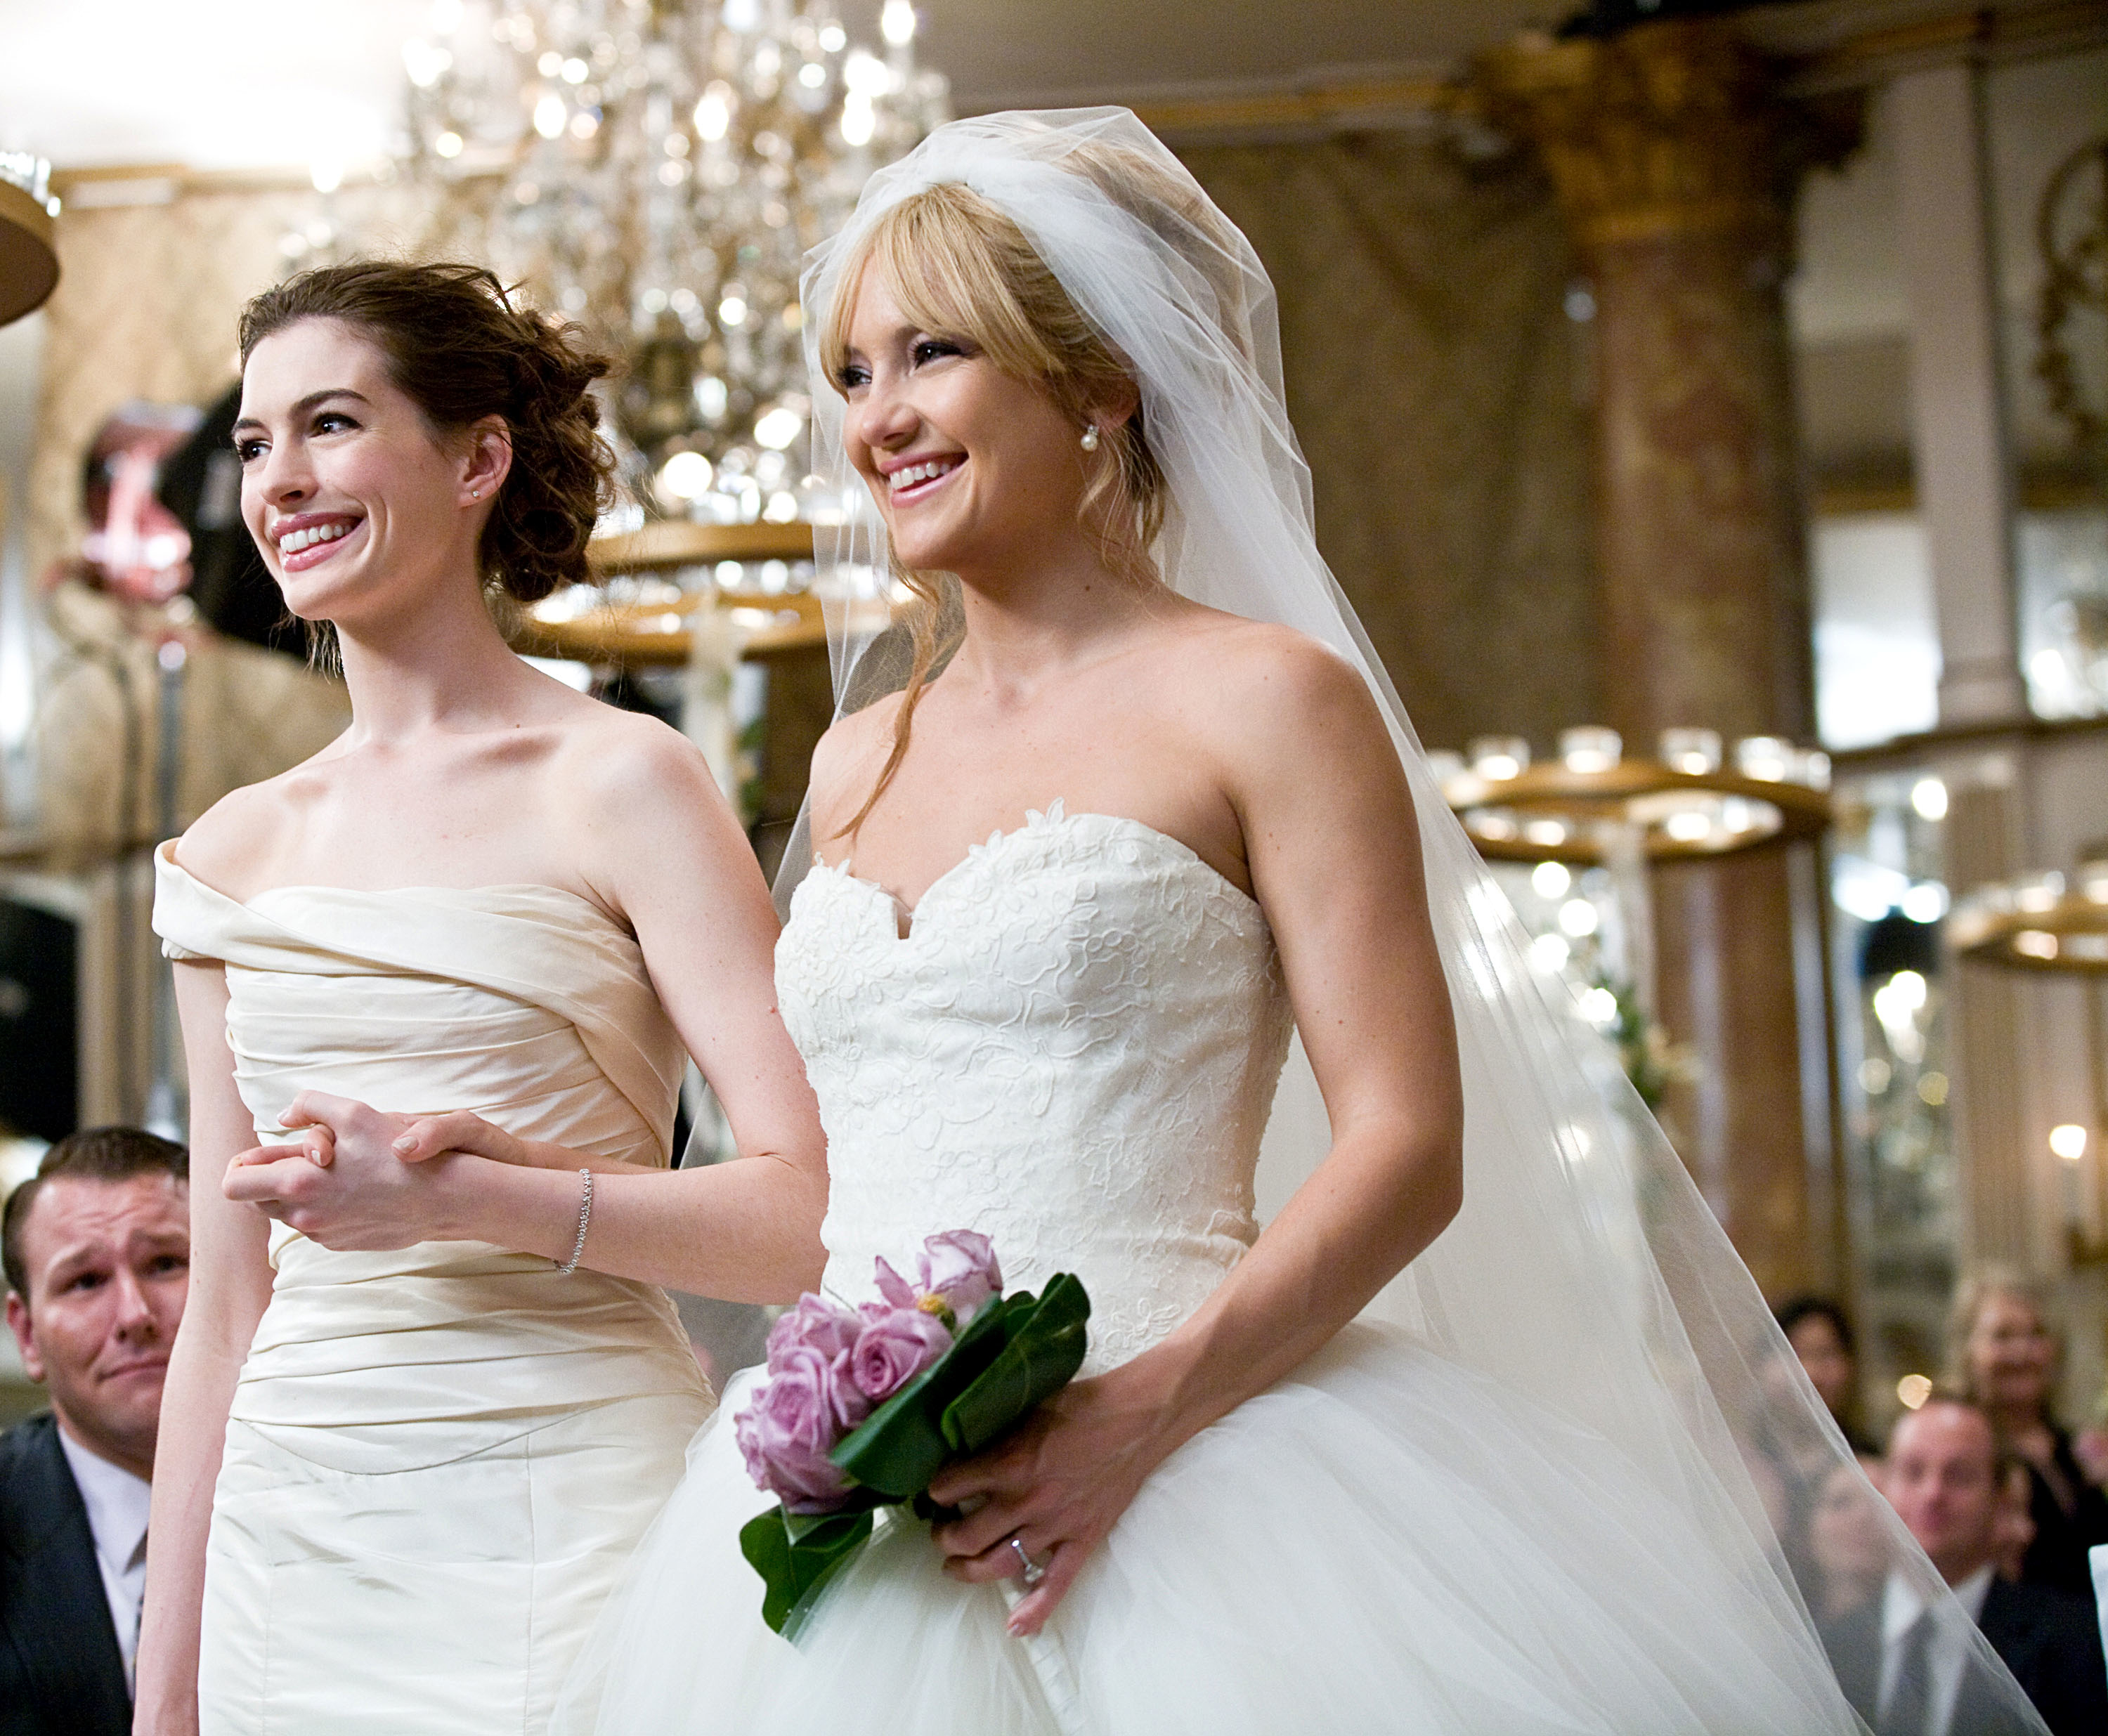 Anne Hathaway and Kate Hudson in wedding dresses, smiling and standing arm-in-arm at a wedding ceremony